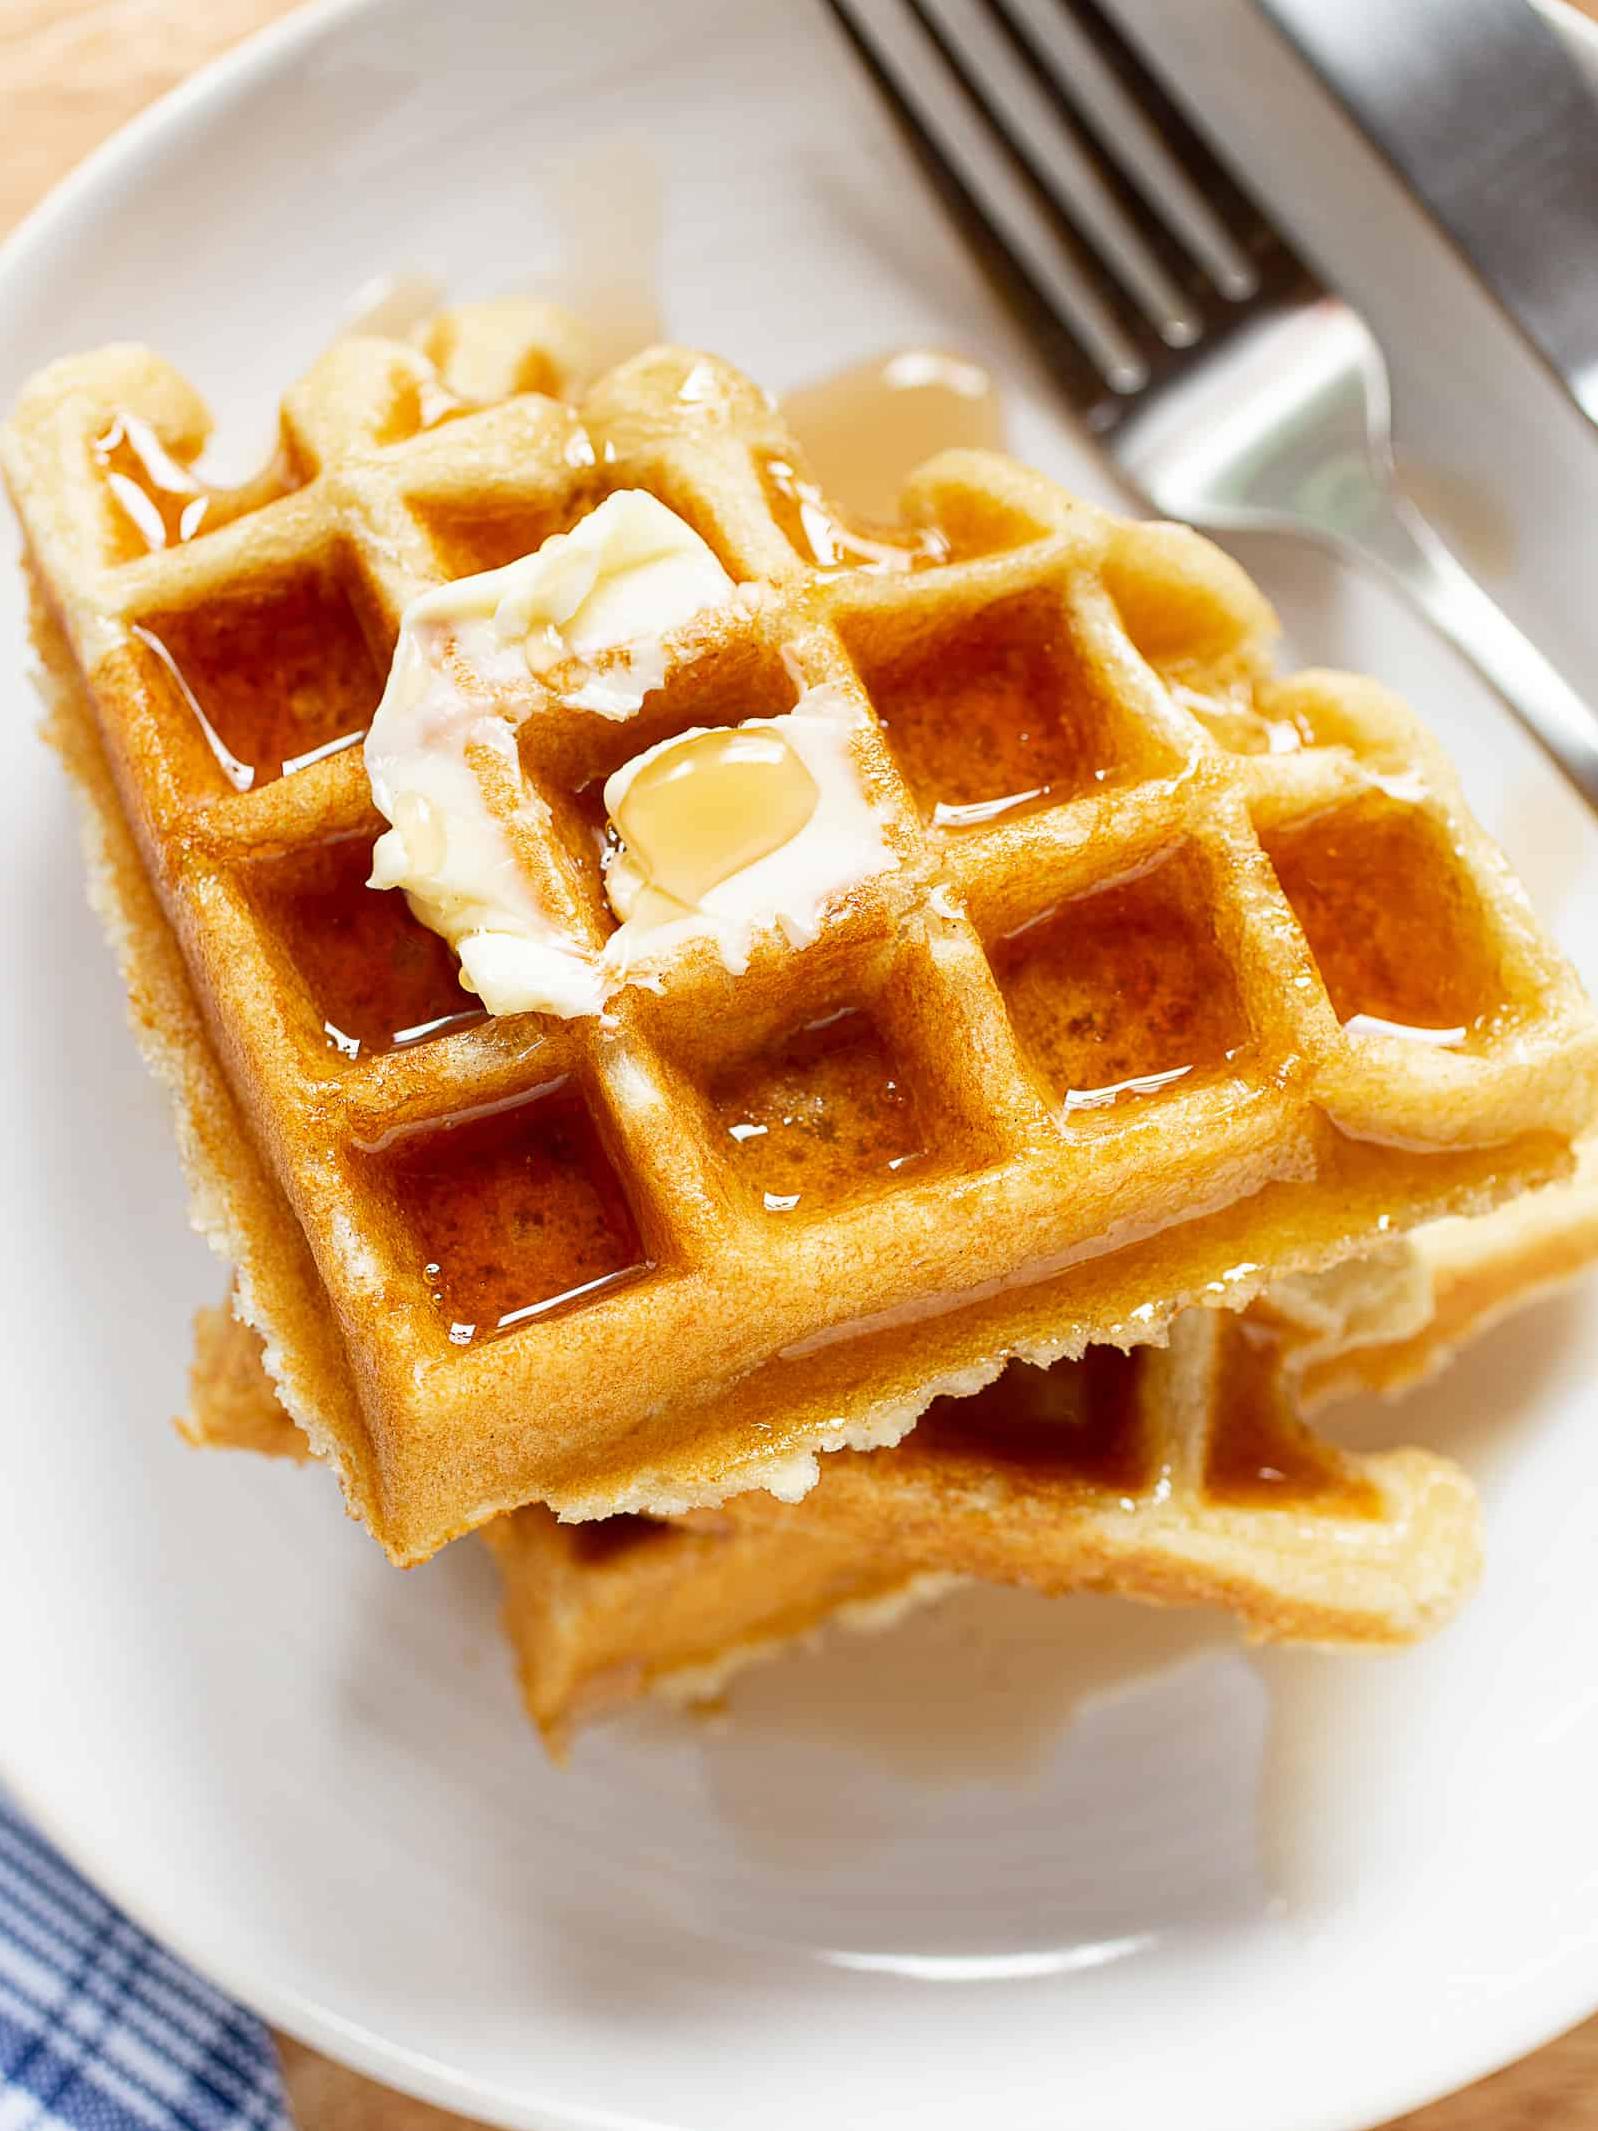  Your search for the perfect gluten-free waffle recipe is over!